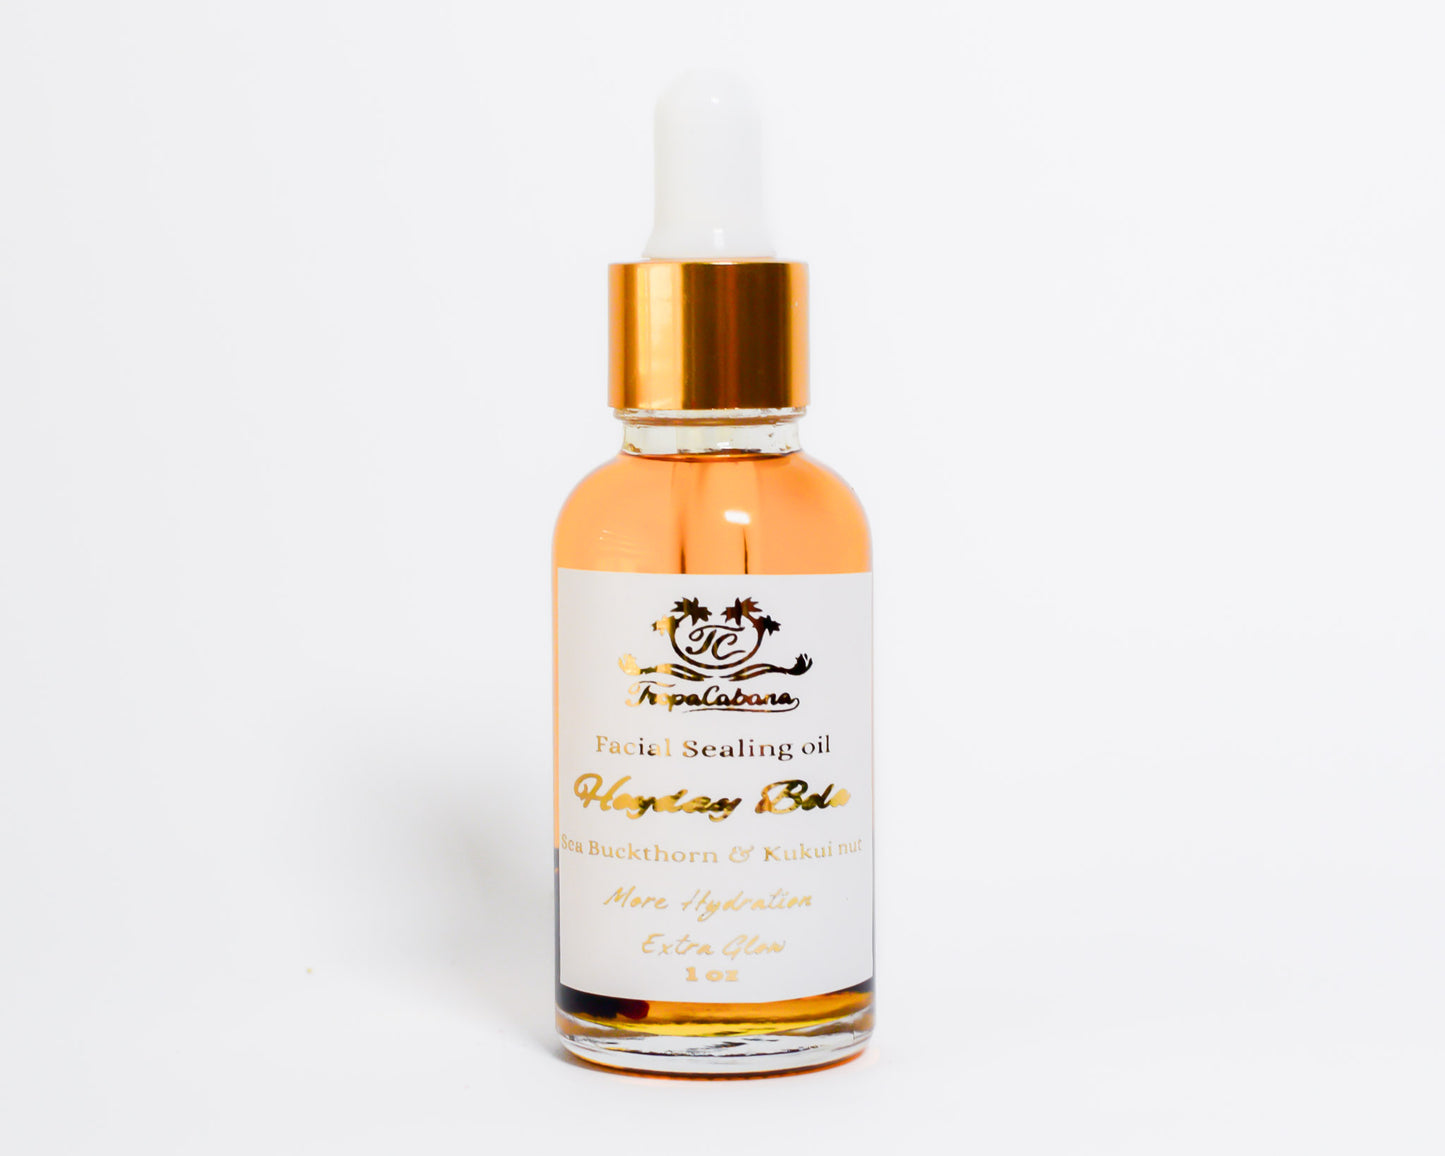 TropaCabana, Heyday Bela Facial Sealing Oil, Sea Buckthorn & Kukui Nut oil, Vegan Skincare, Natural Skincare, Not tested on animals, Daytime Skincare, Beauty Products, Spa Products